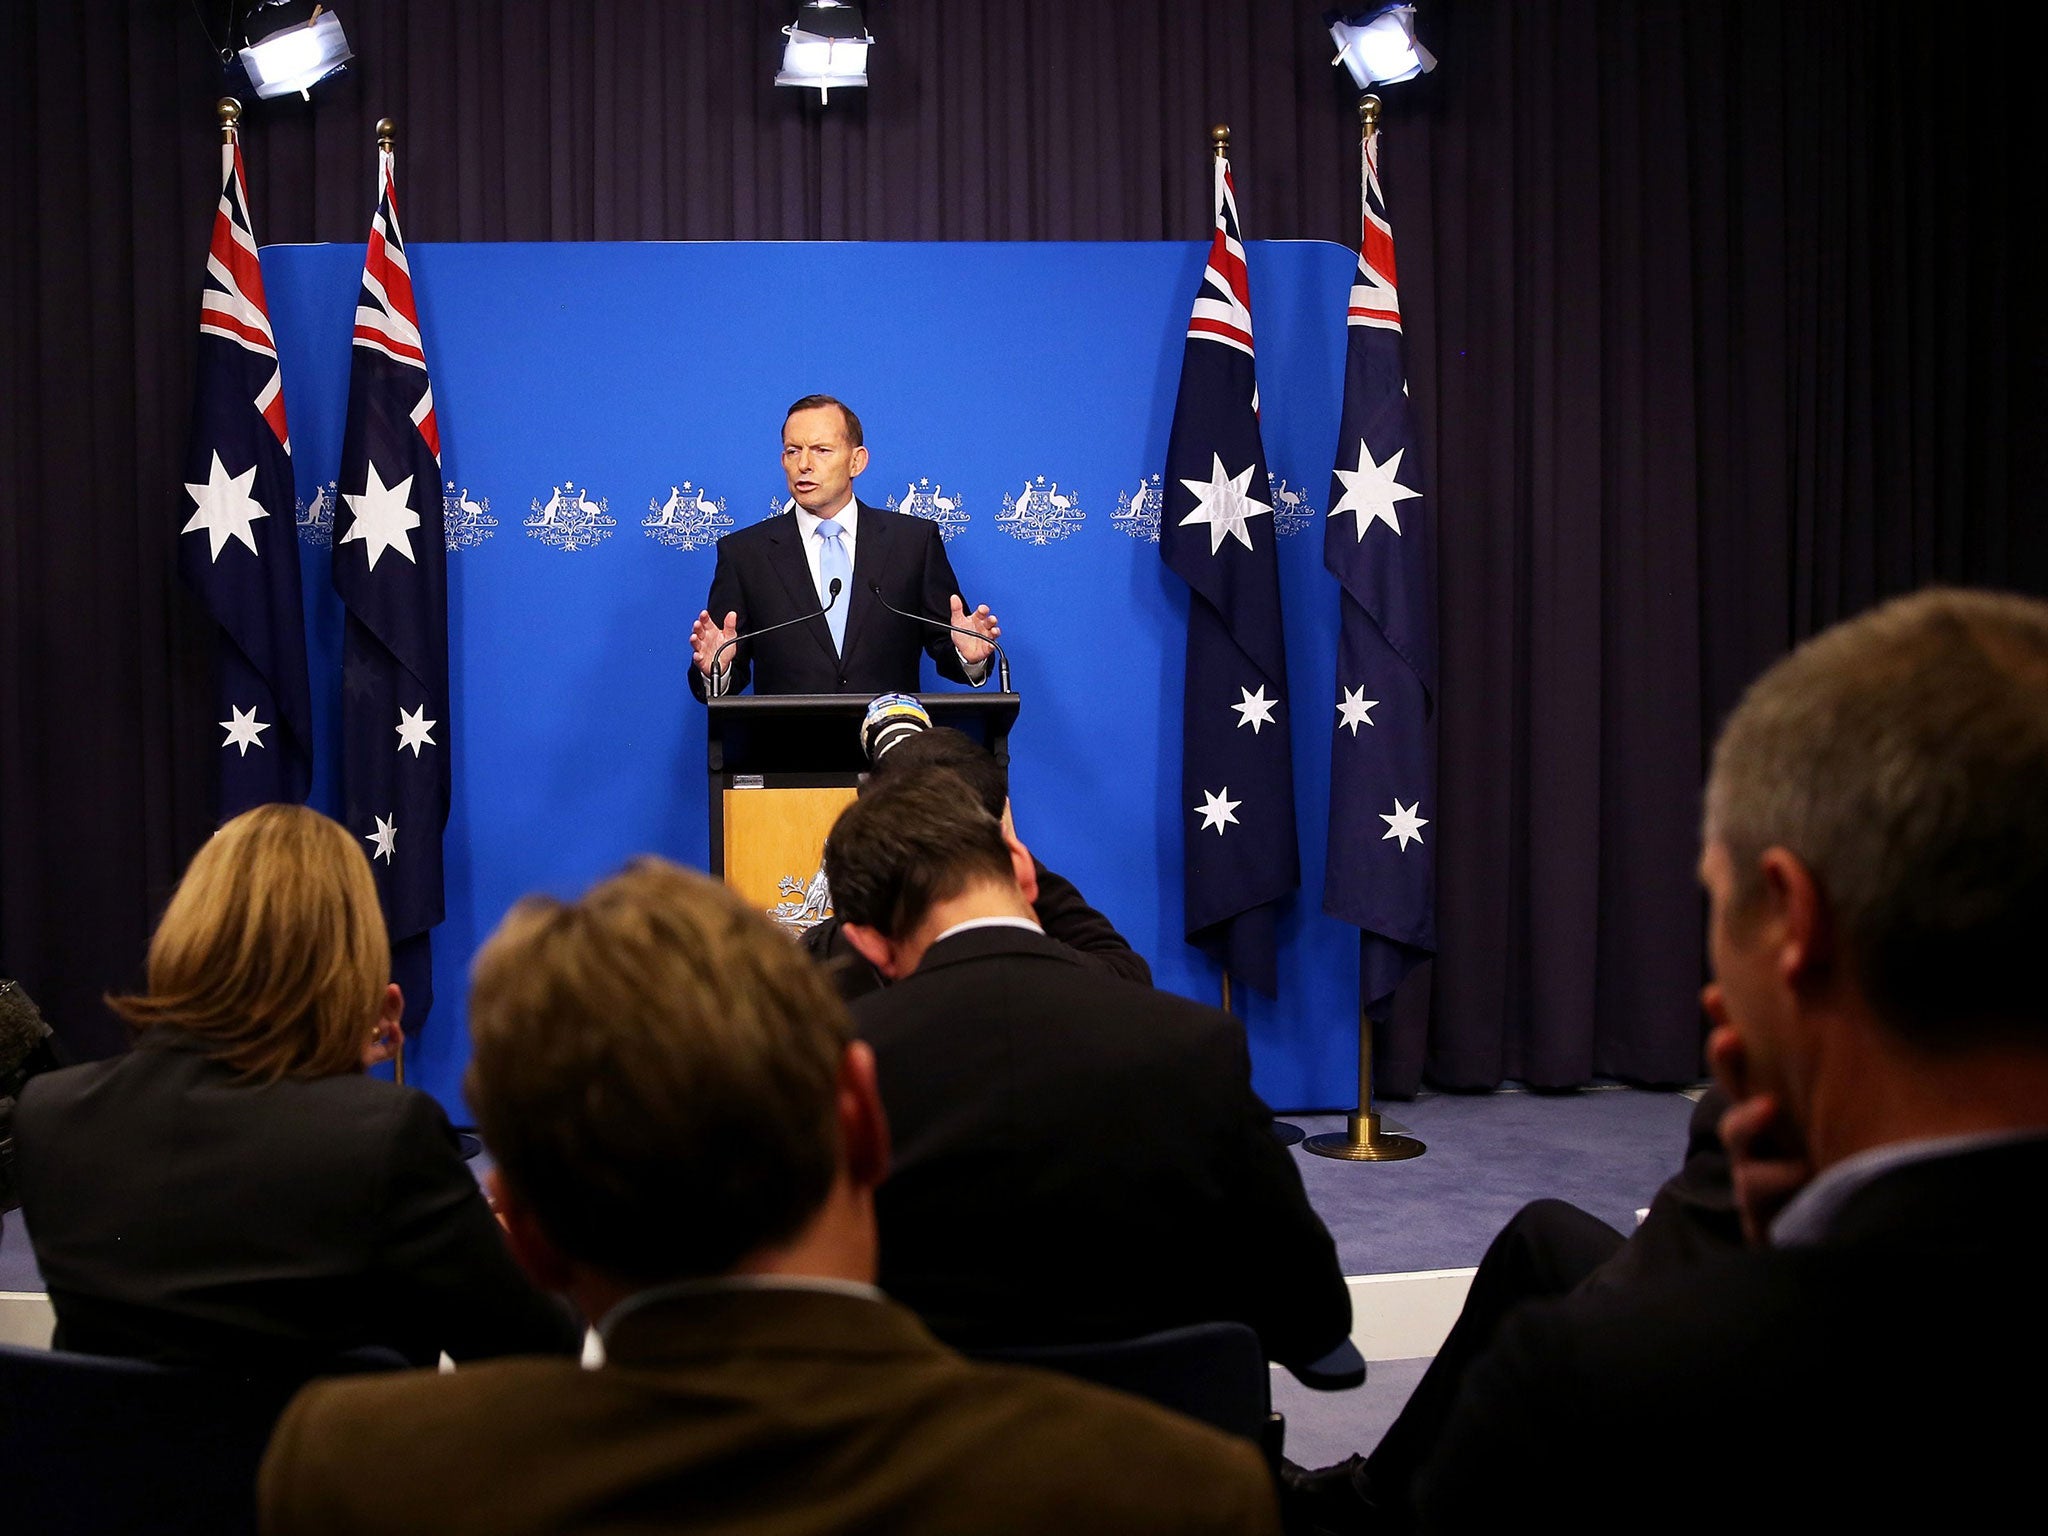 Australia Prime Minister Office on July 23, 2014 shows Prime Minister Tony Abbott speaking at a press conference in Canberra